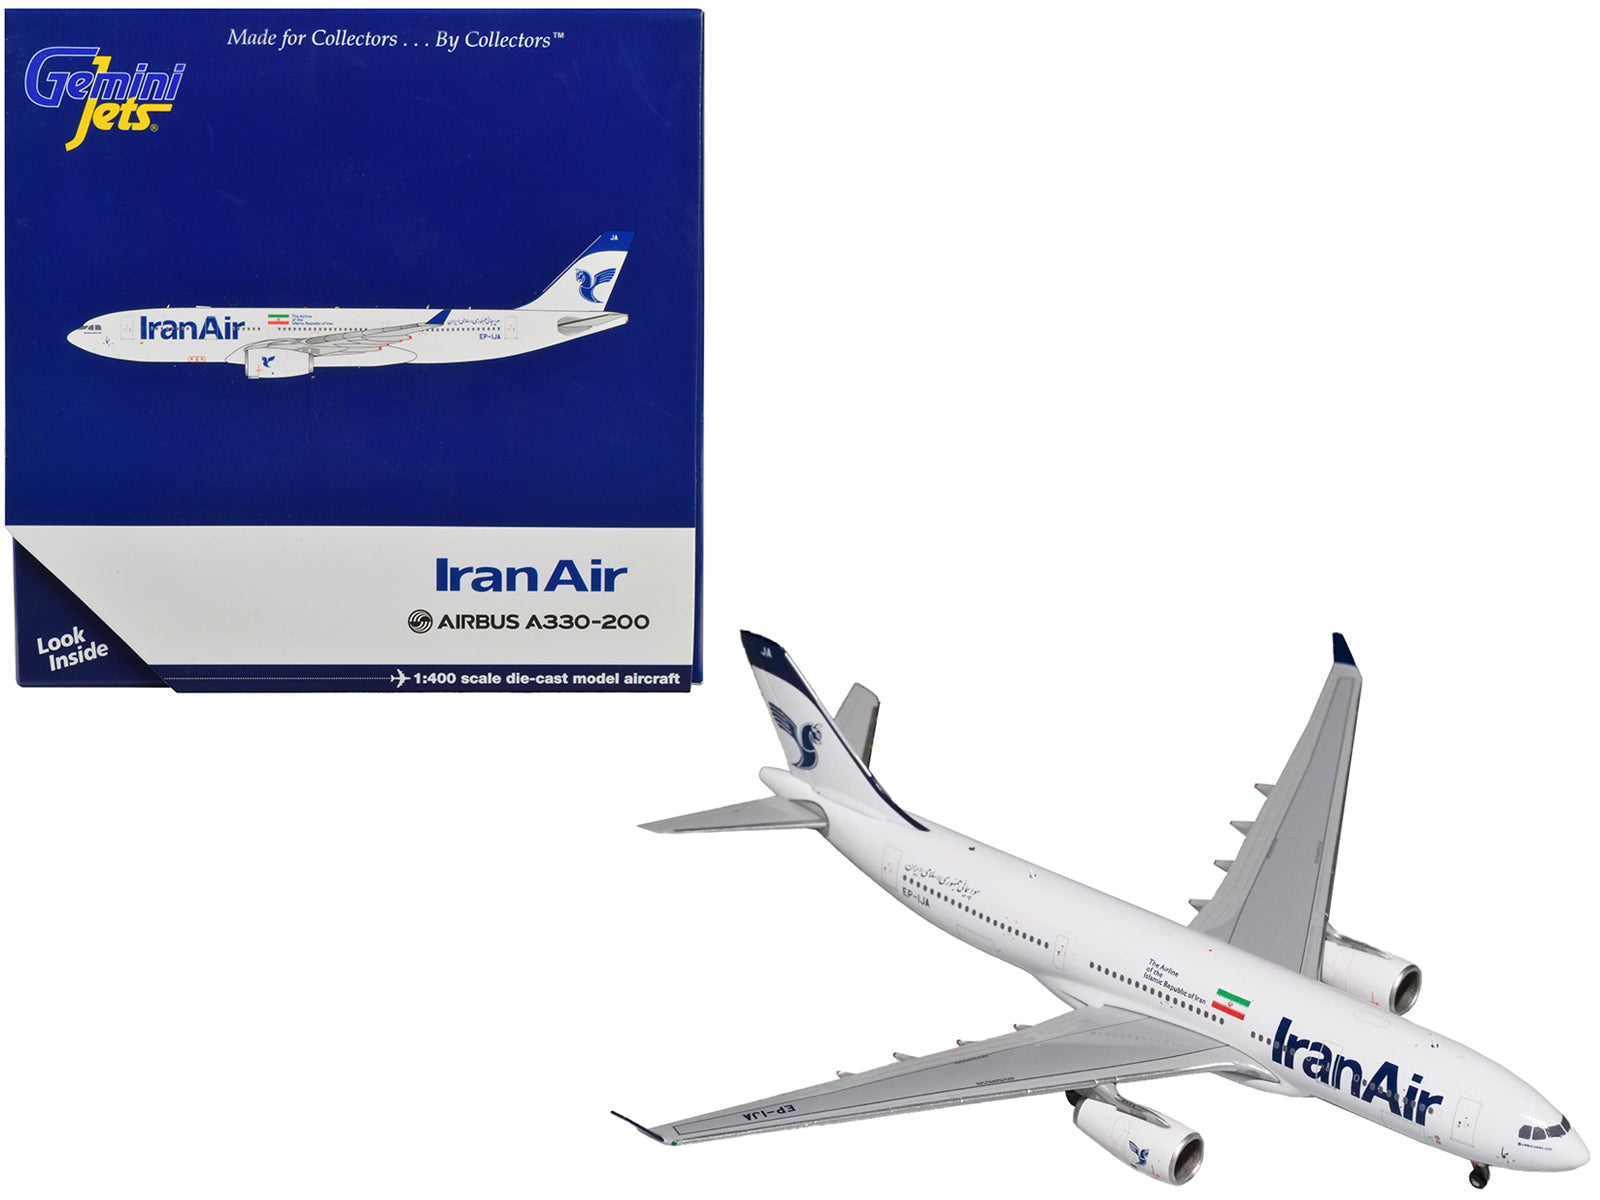 Airbus A330-200 Commercial Aircraft "Iran Air" White 1/400 Diecast Model Airplane by GeminiJets